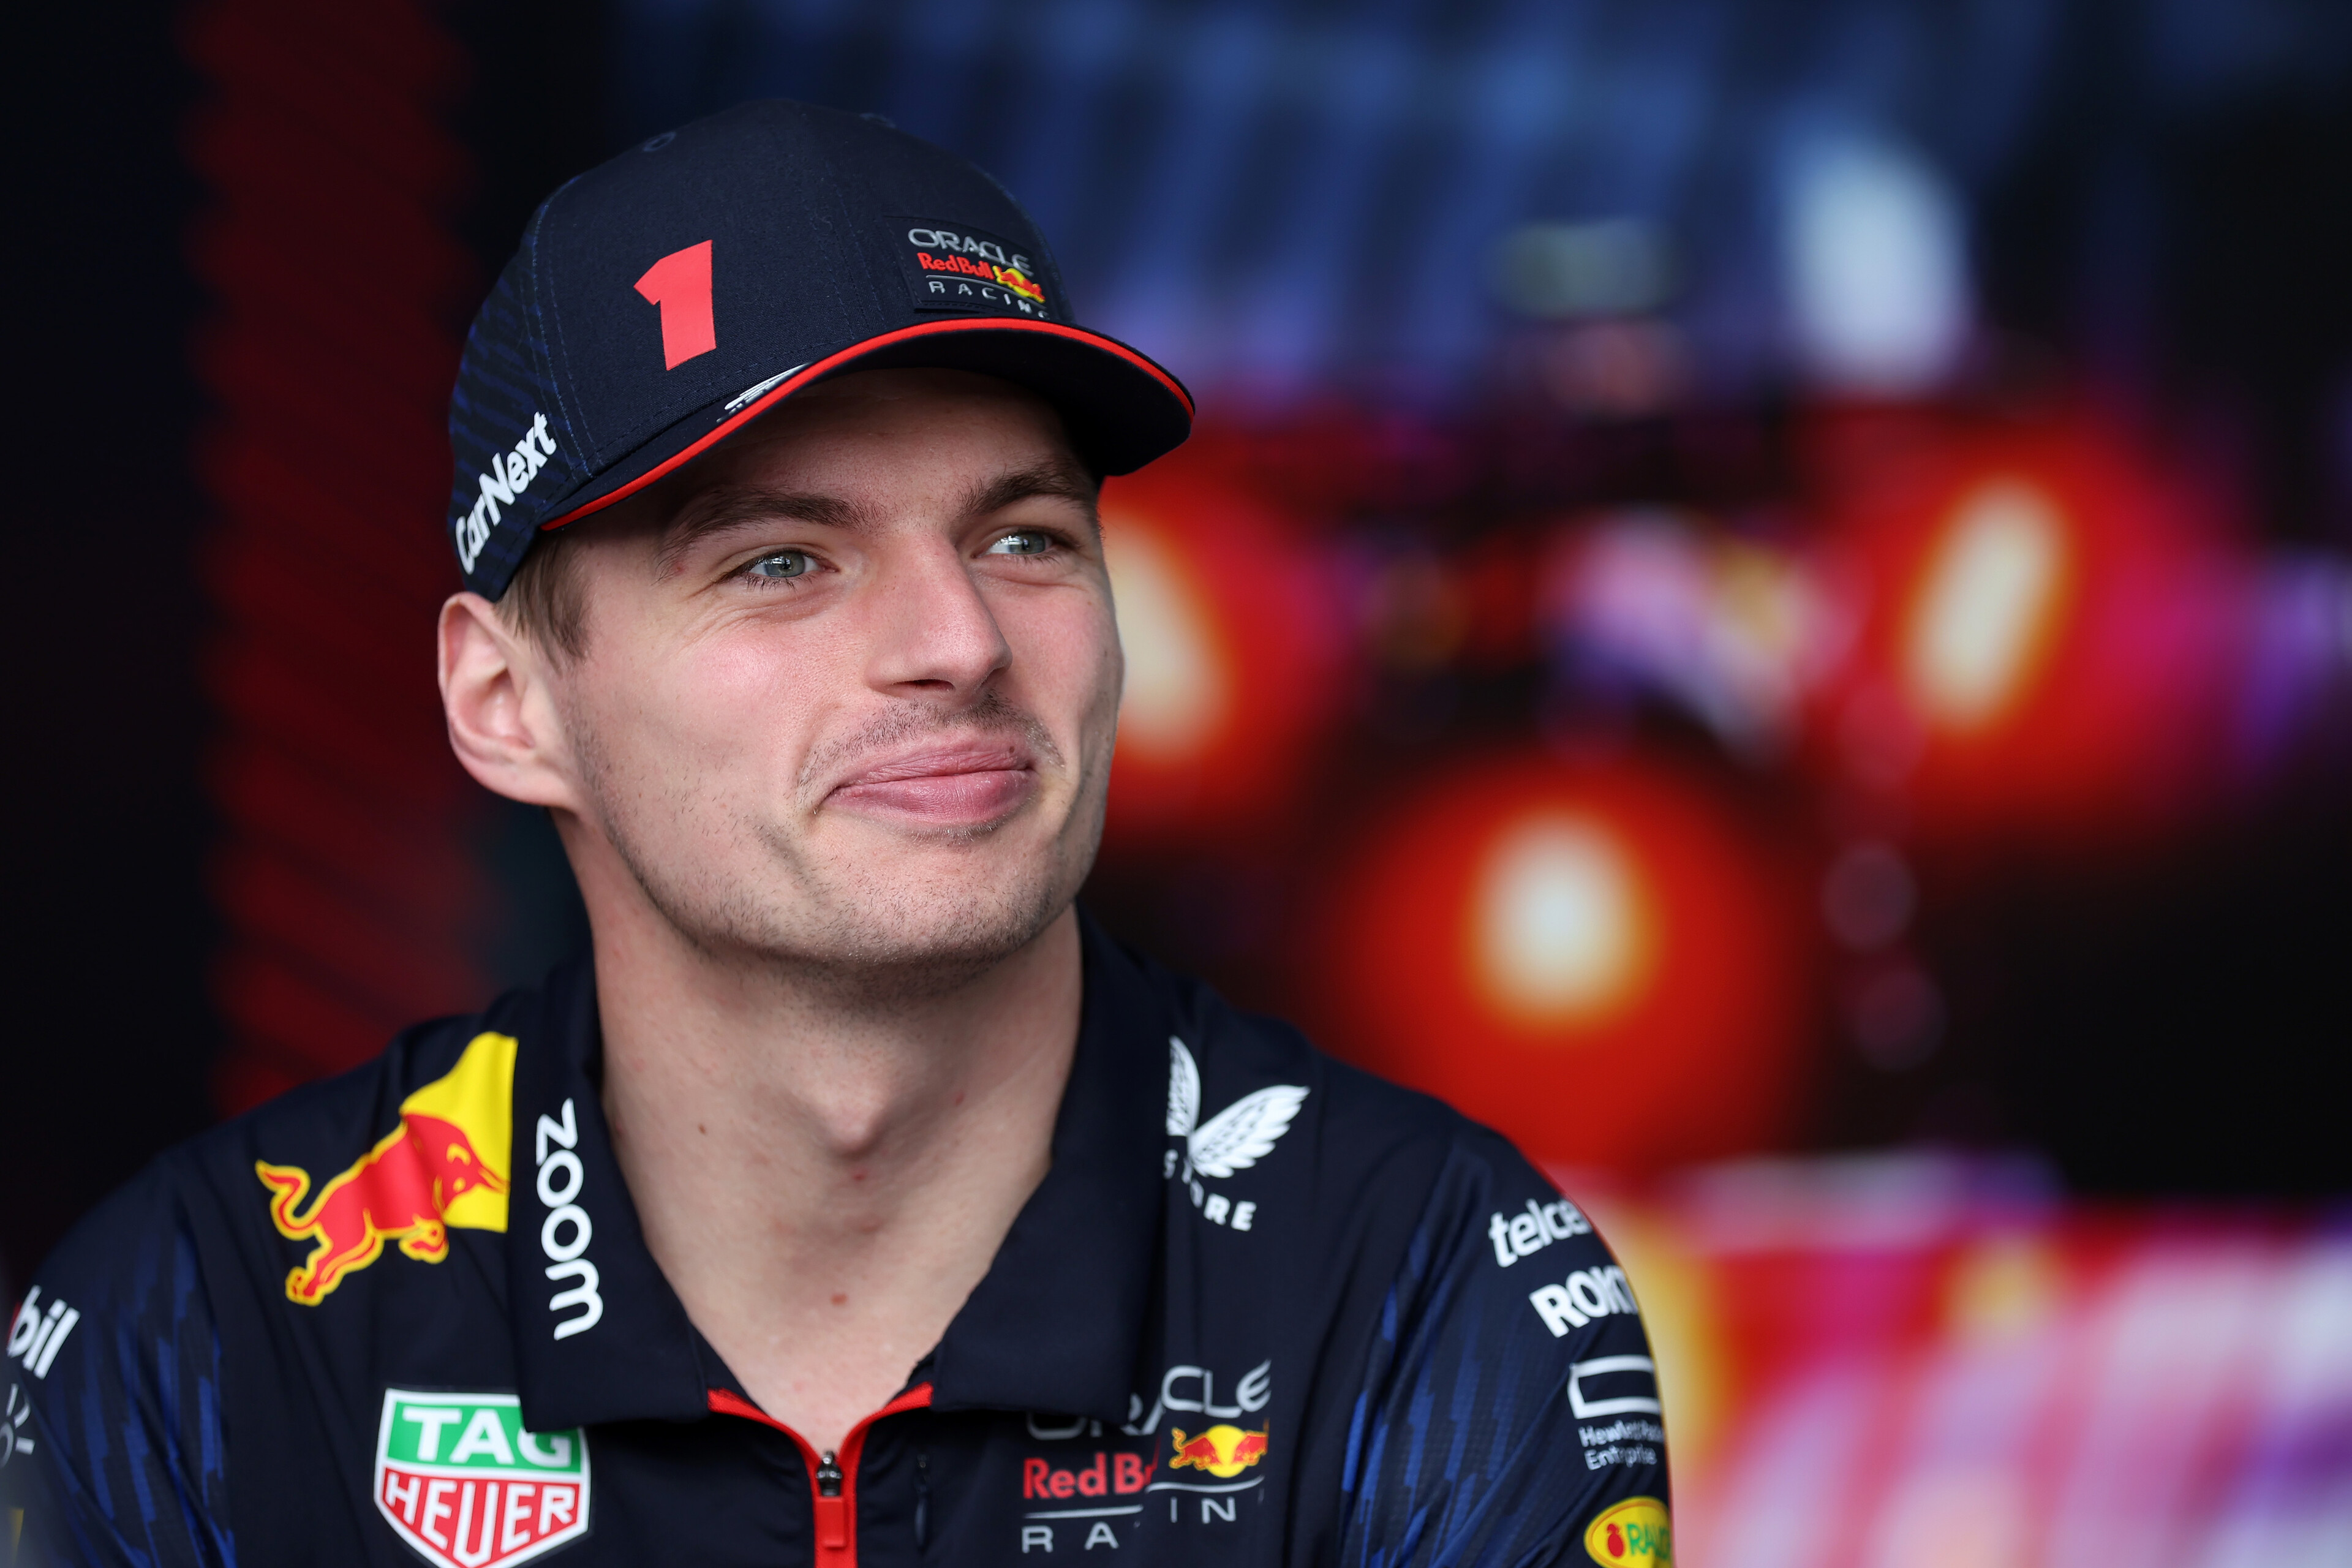 Max Verstappen Proves He's The Fastest In The World With Insane Racing ...